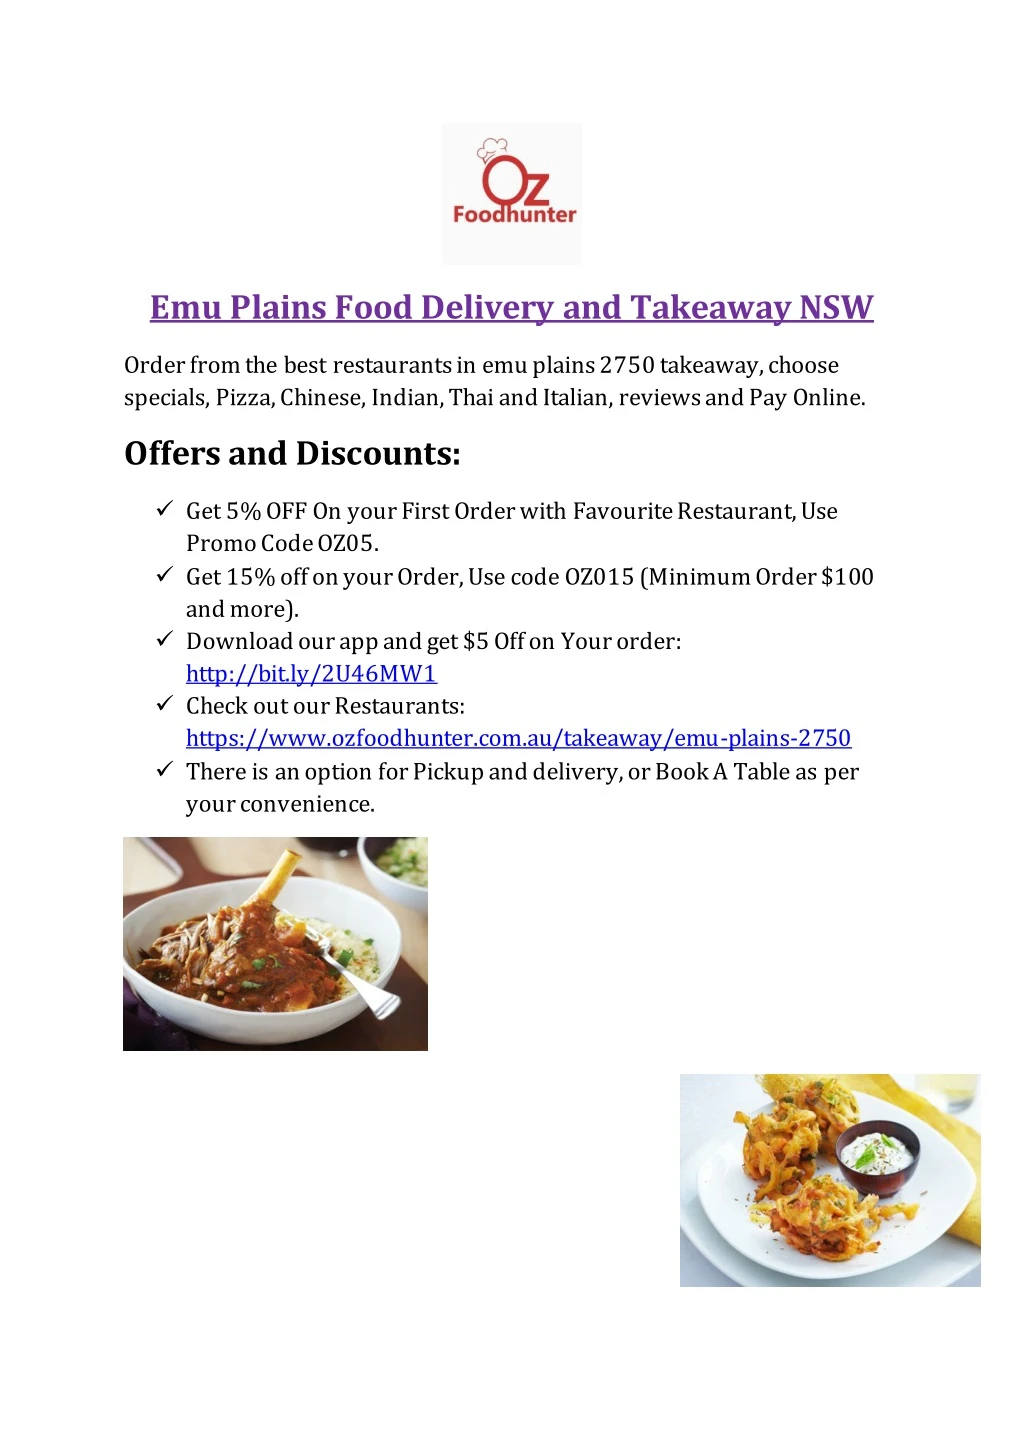 emu plains food delivery and takeaway nsw